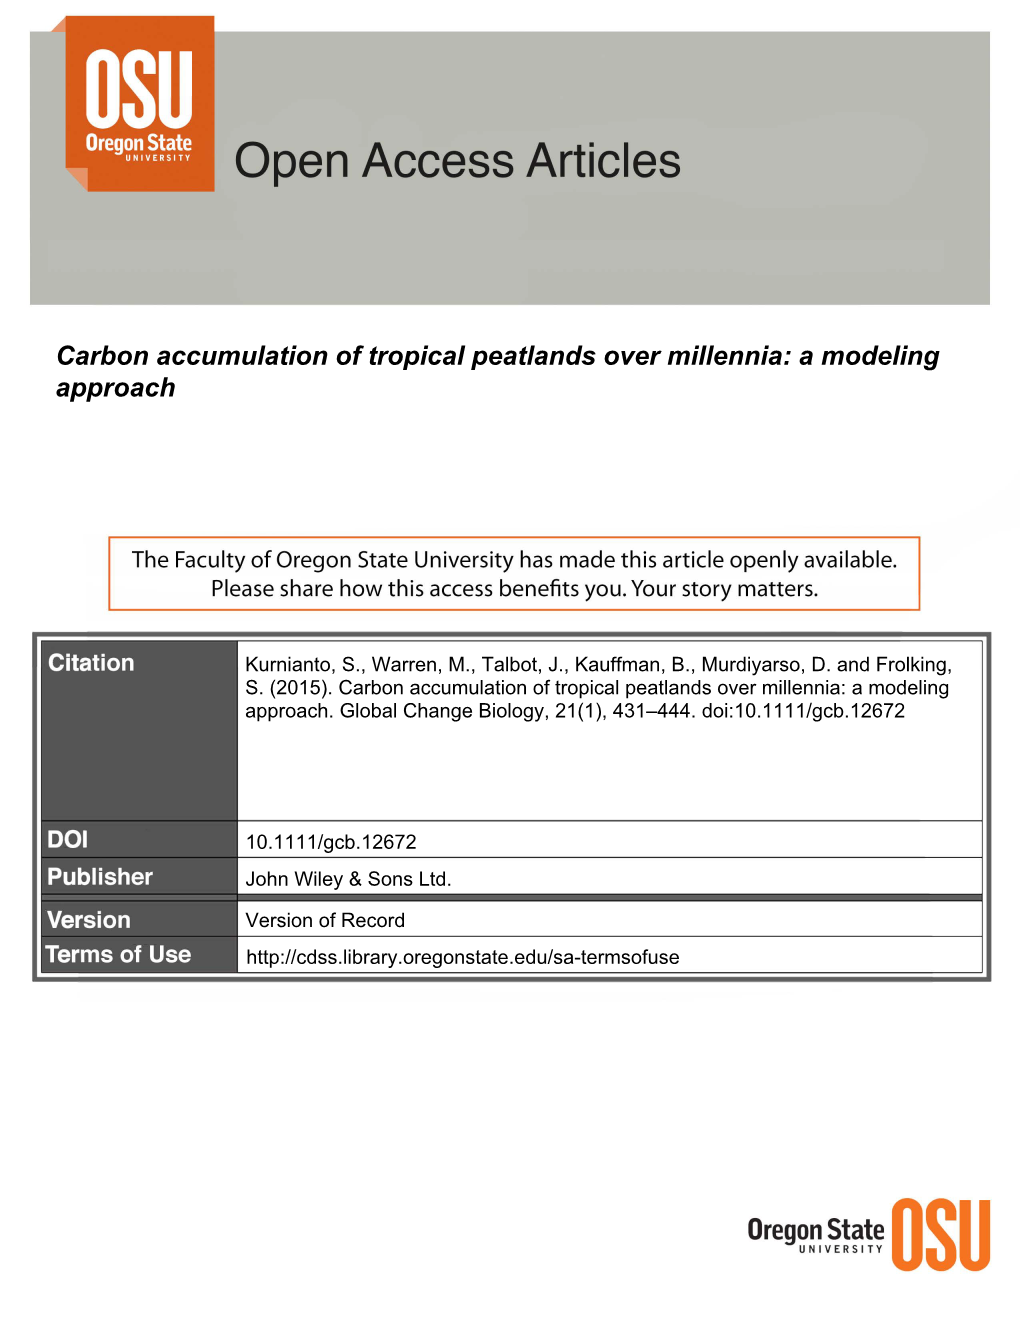 Carbon Accumulation of Tropical Peatlands Over Millennia: a Modeling Approach